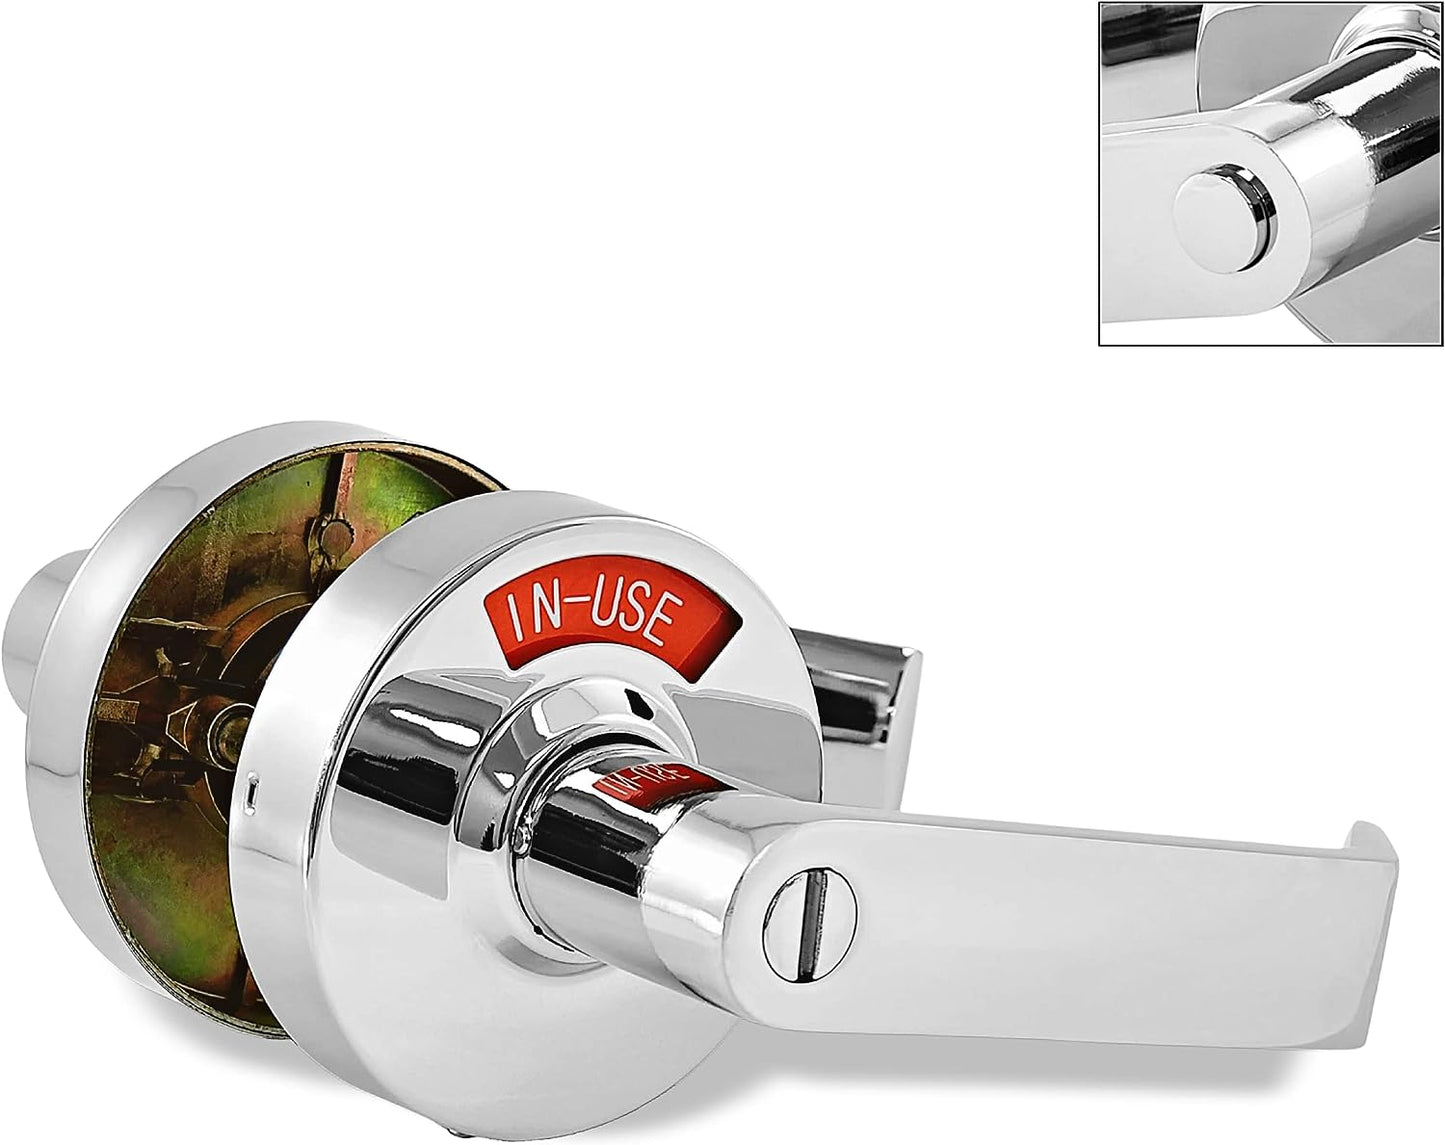 ADA Door Lock with Indicator in Polished Chrome - Right-Handed